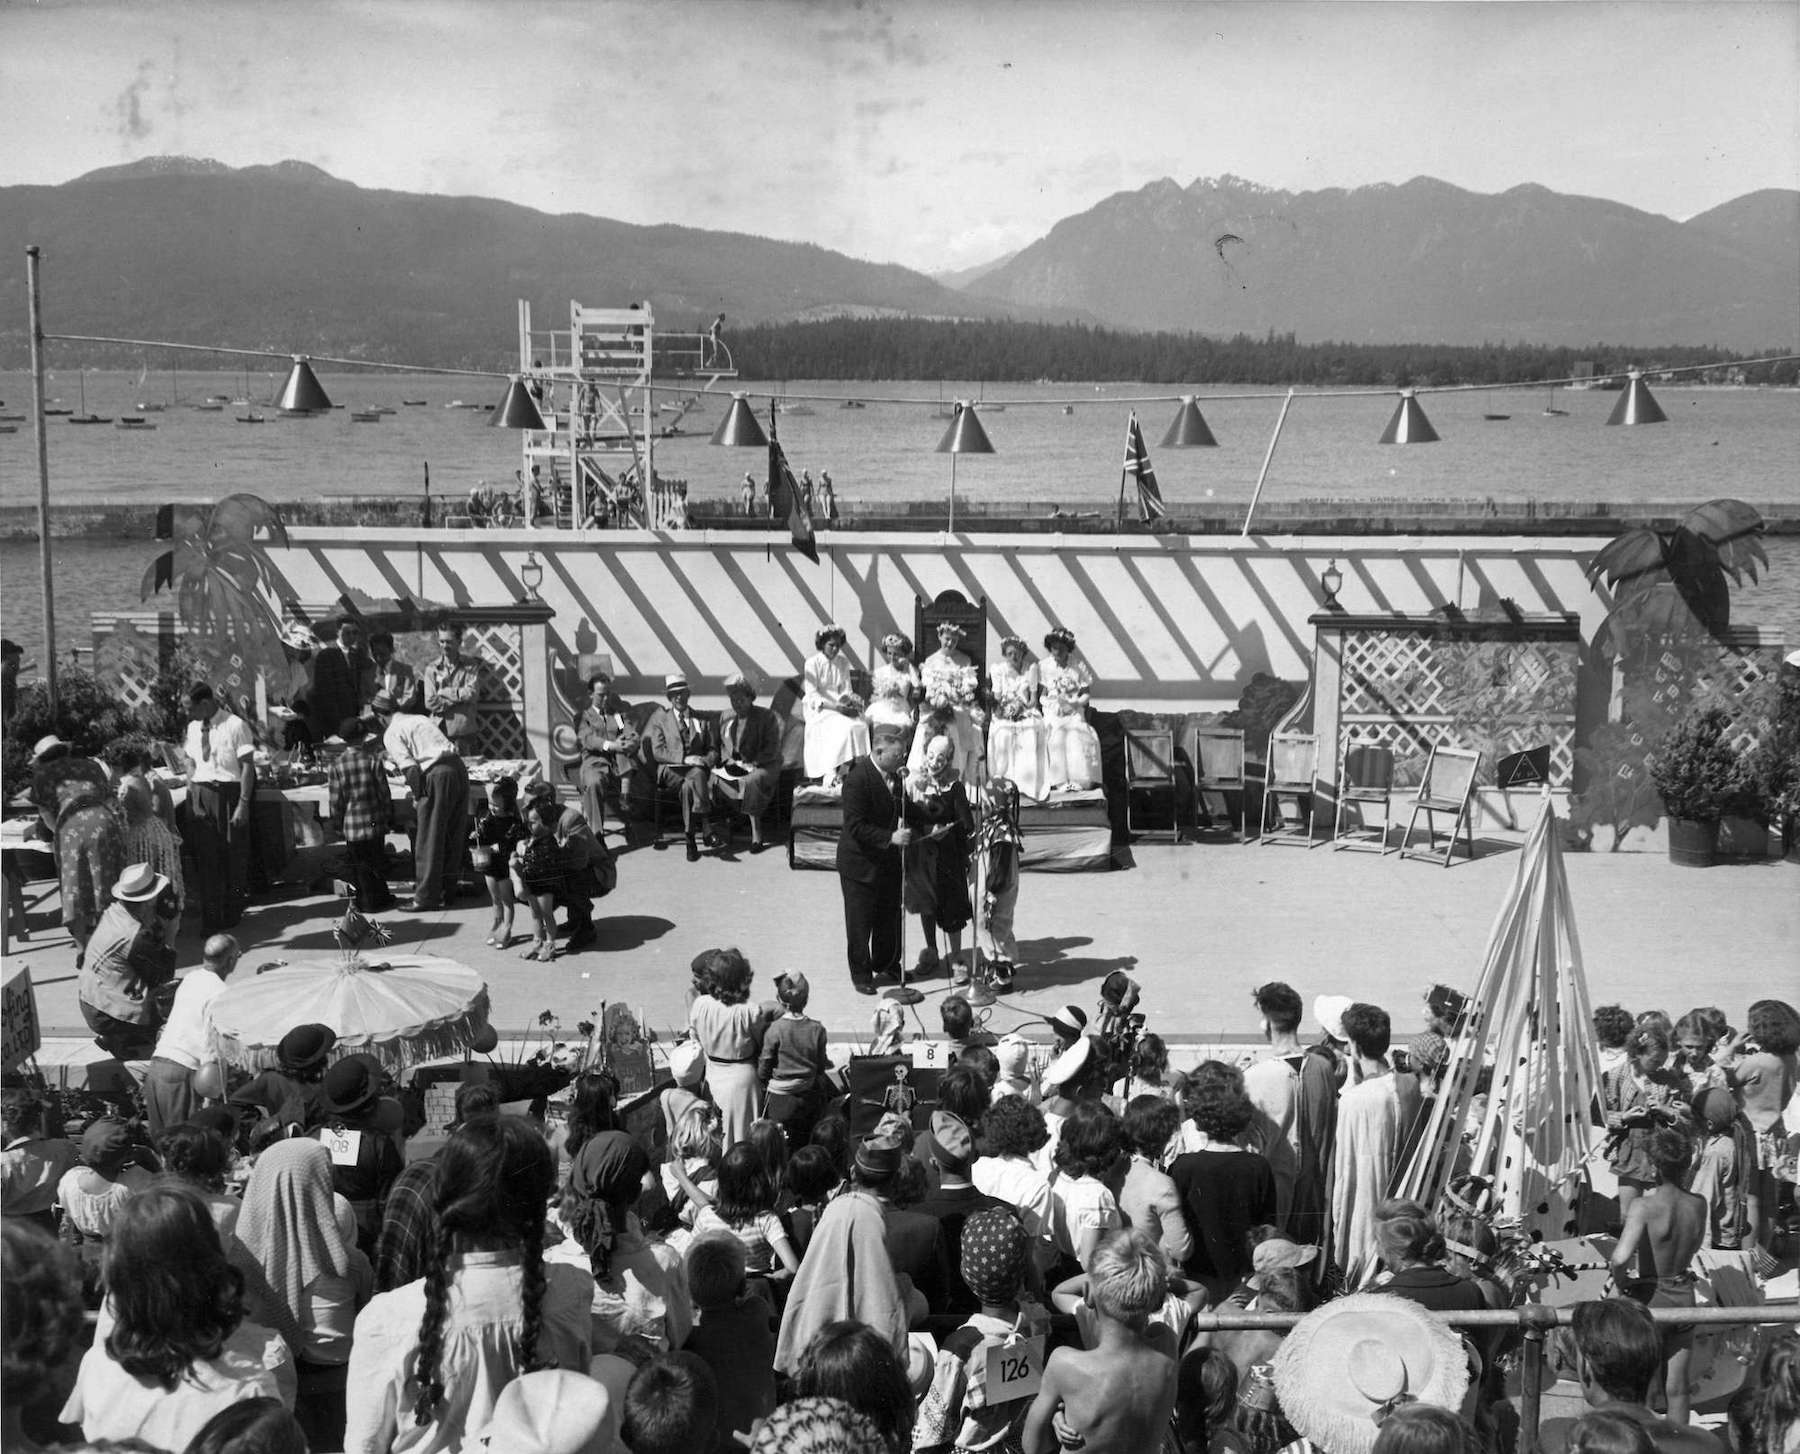 1948 - A man speaking to clowns and other activities on stage in front of Kitsilano Pool for Kitsilano Day